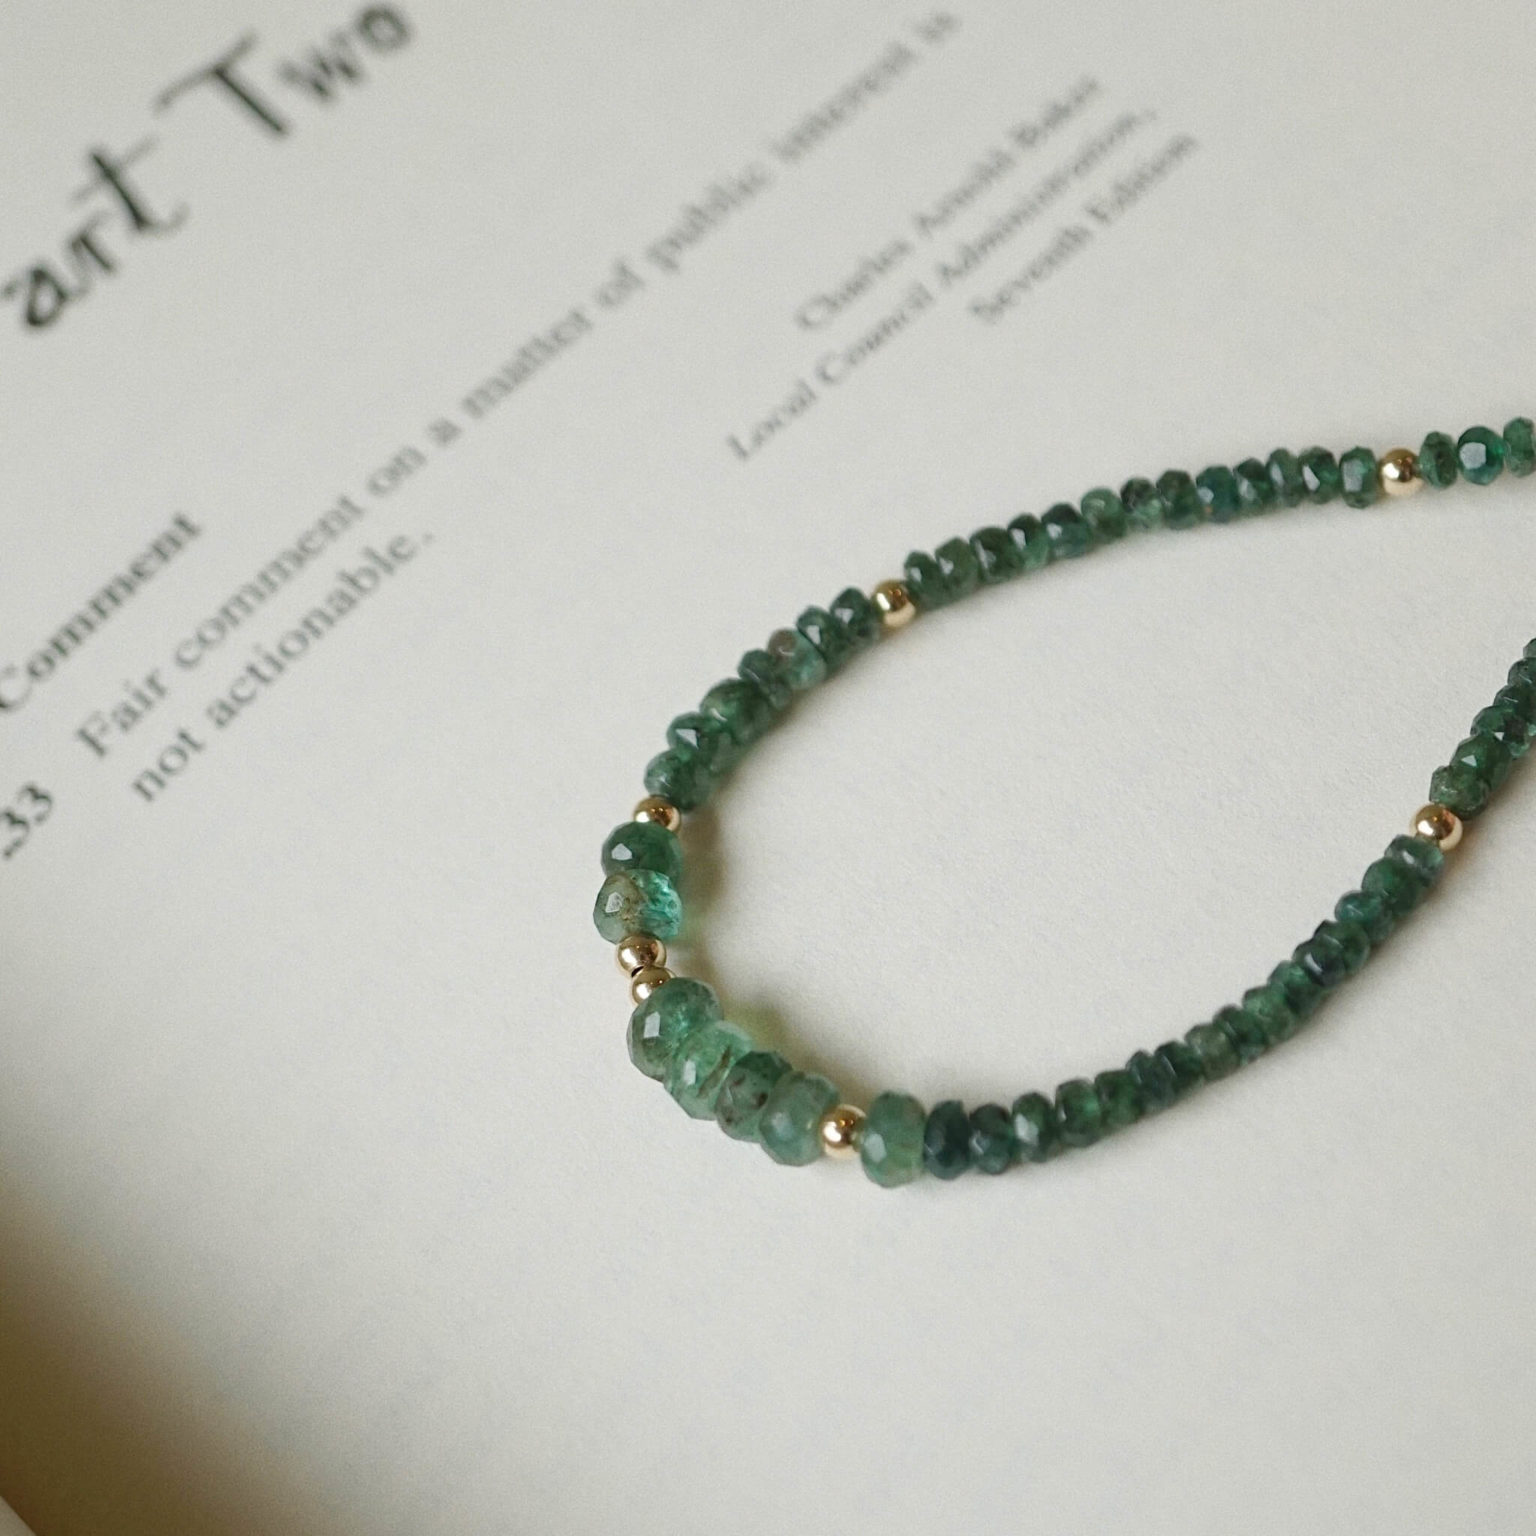 Stone collection BEADED BRACELET – NATURAL EMERALD